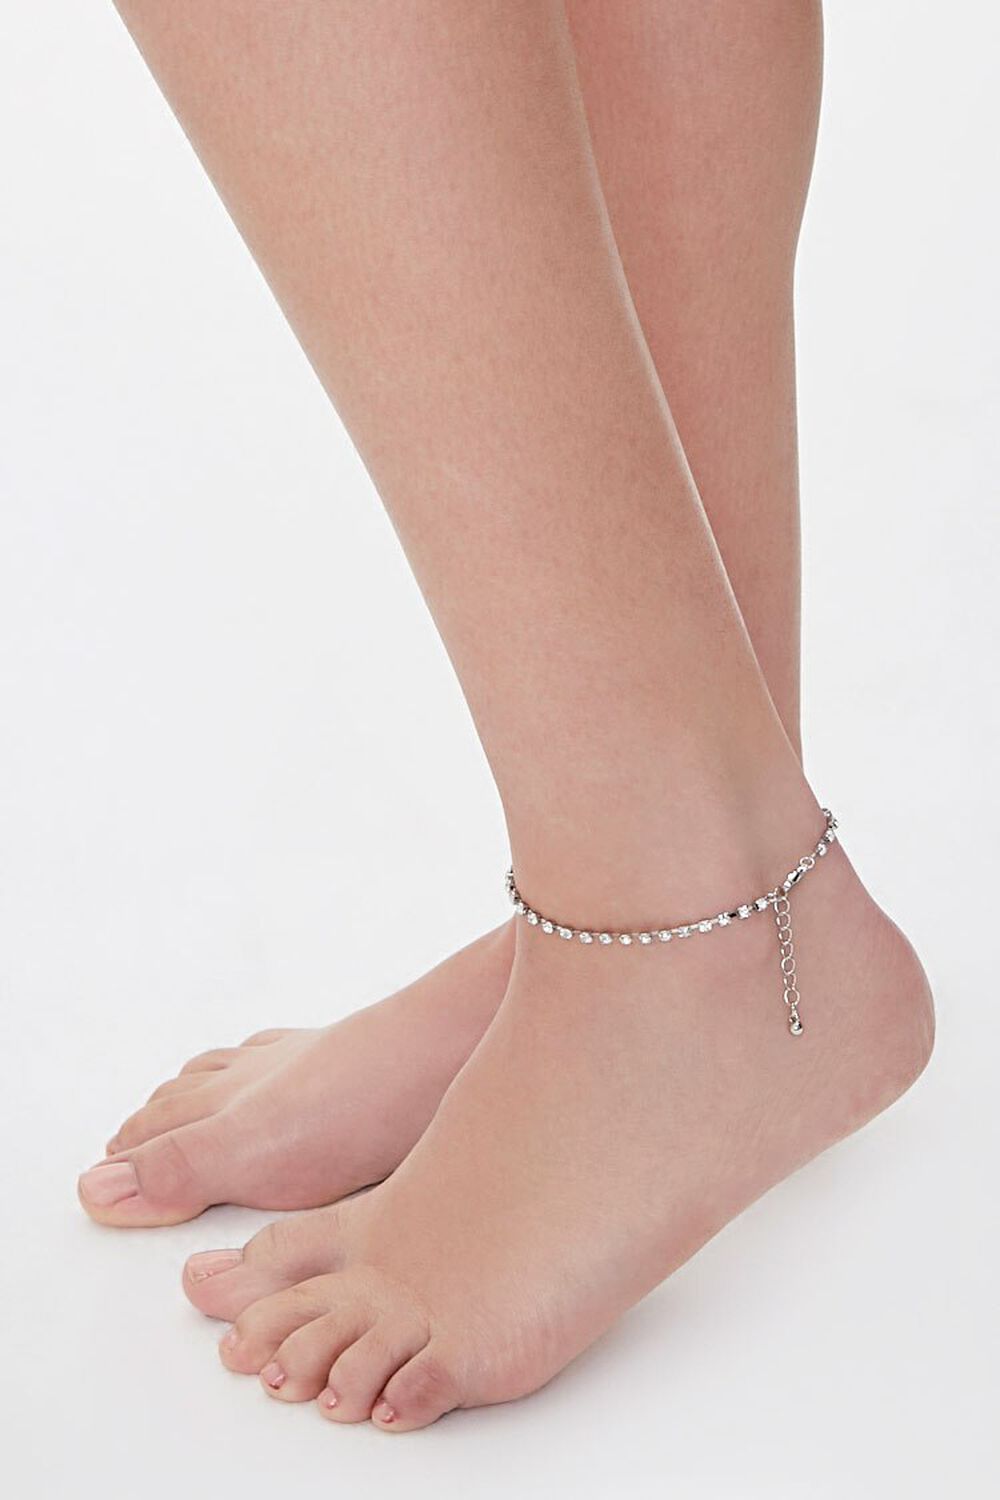 SILVER Rhinestone Box Chain Anklet, image 1